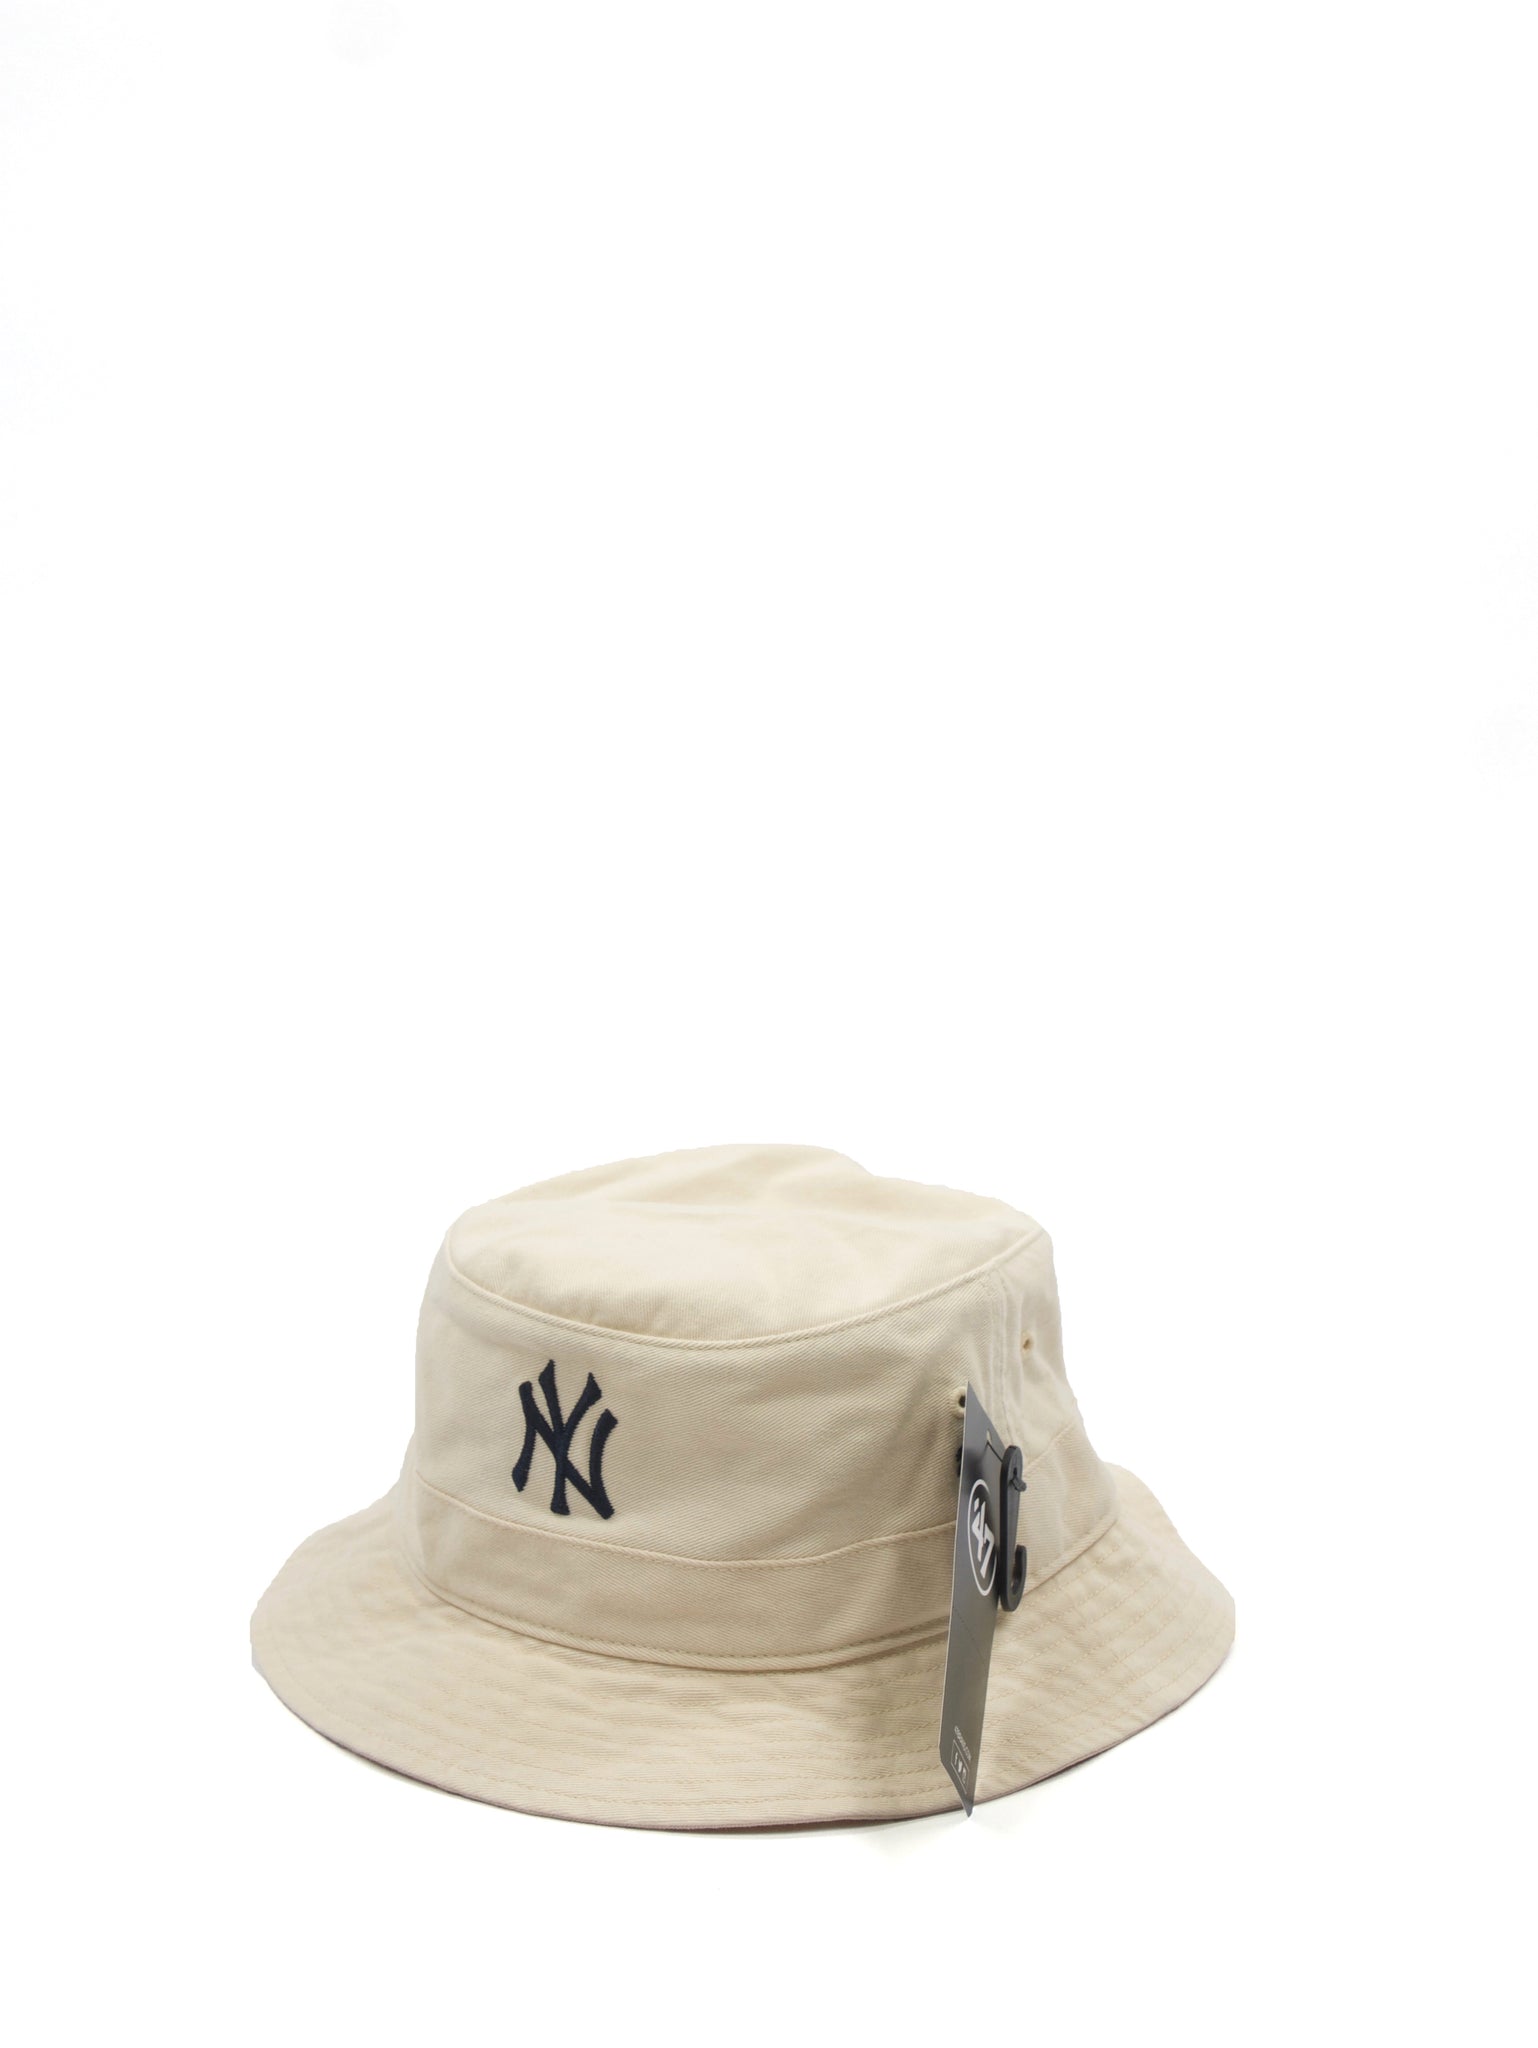  '47 Brand Relaxed Fit Cap - MLB New York Yankees